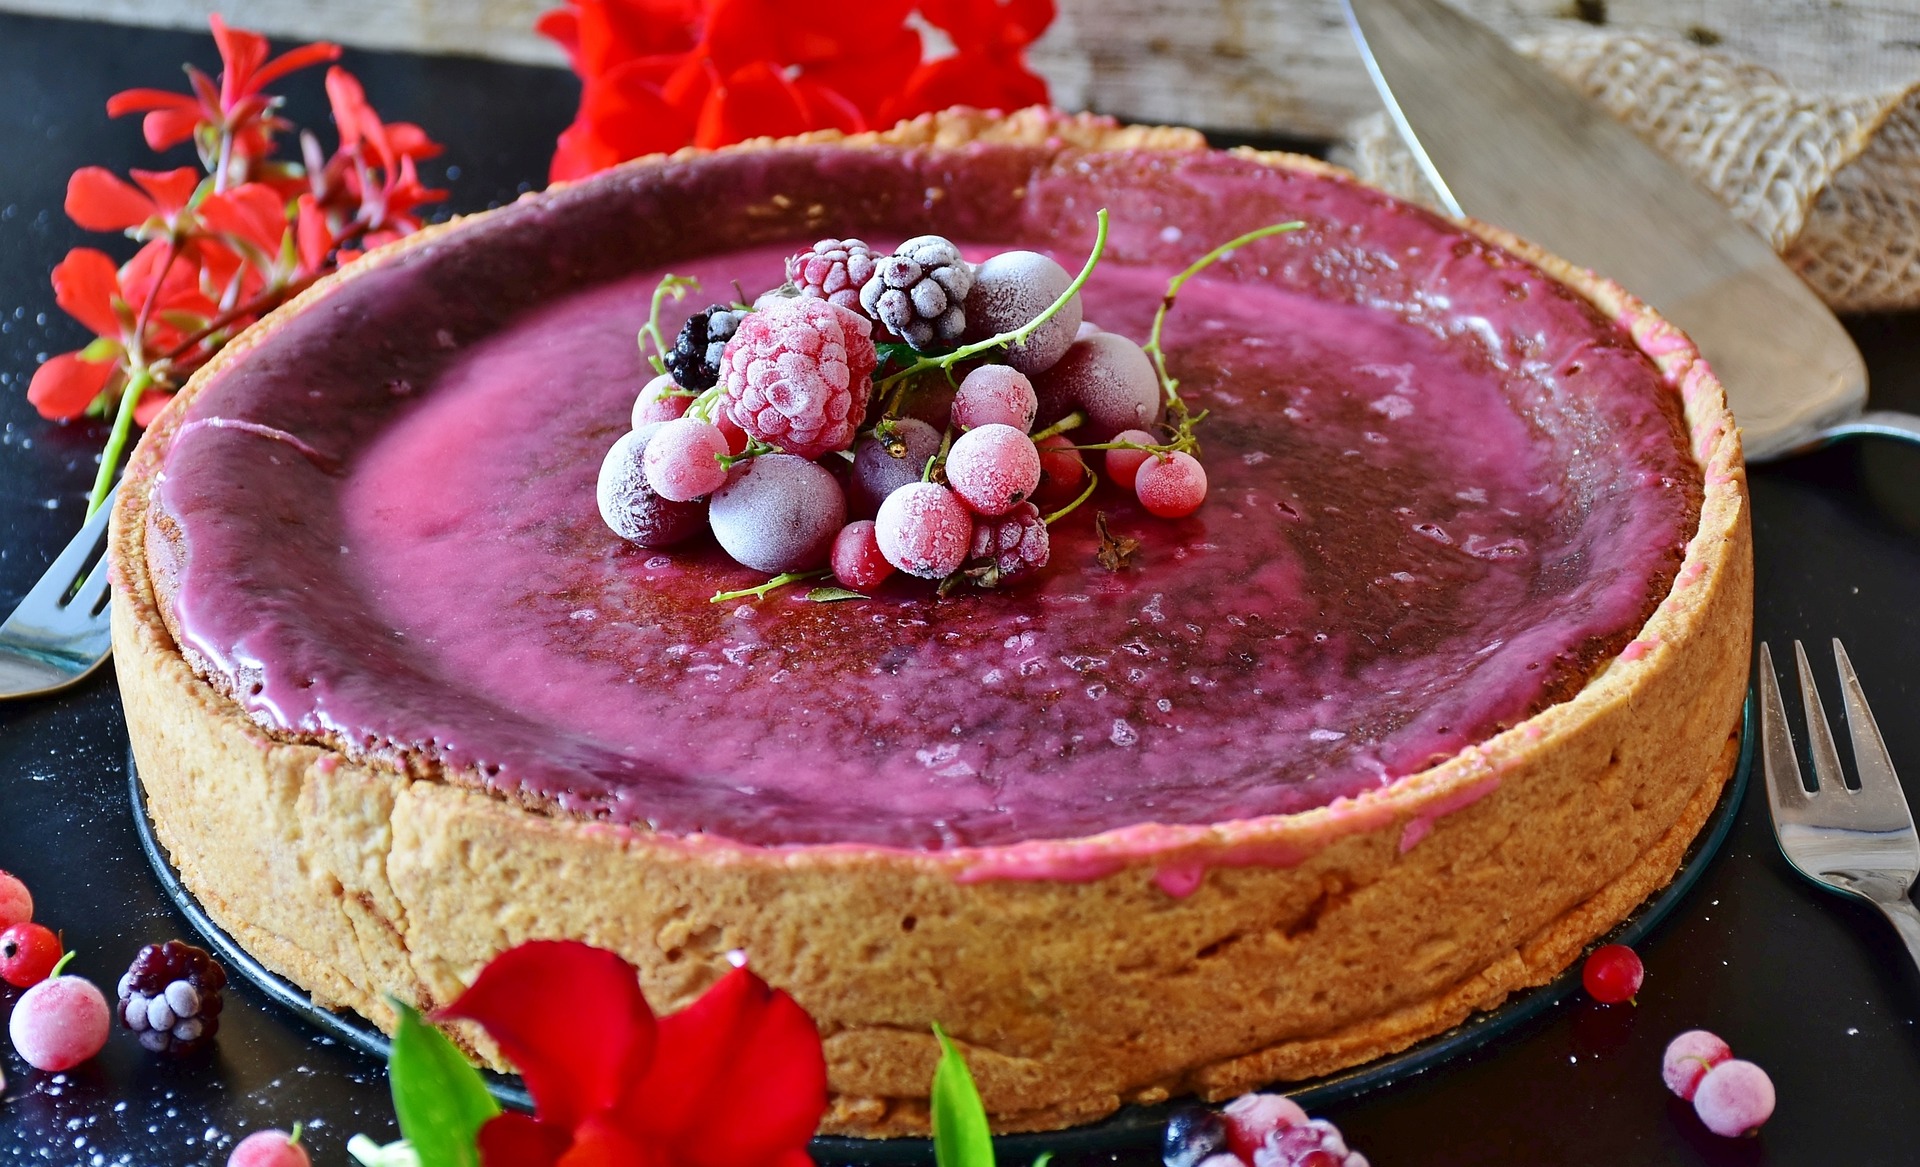 Cook the Book: Showstopper Desserts: Cheesecake